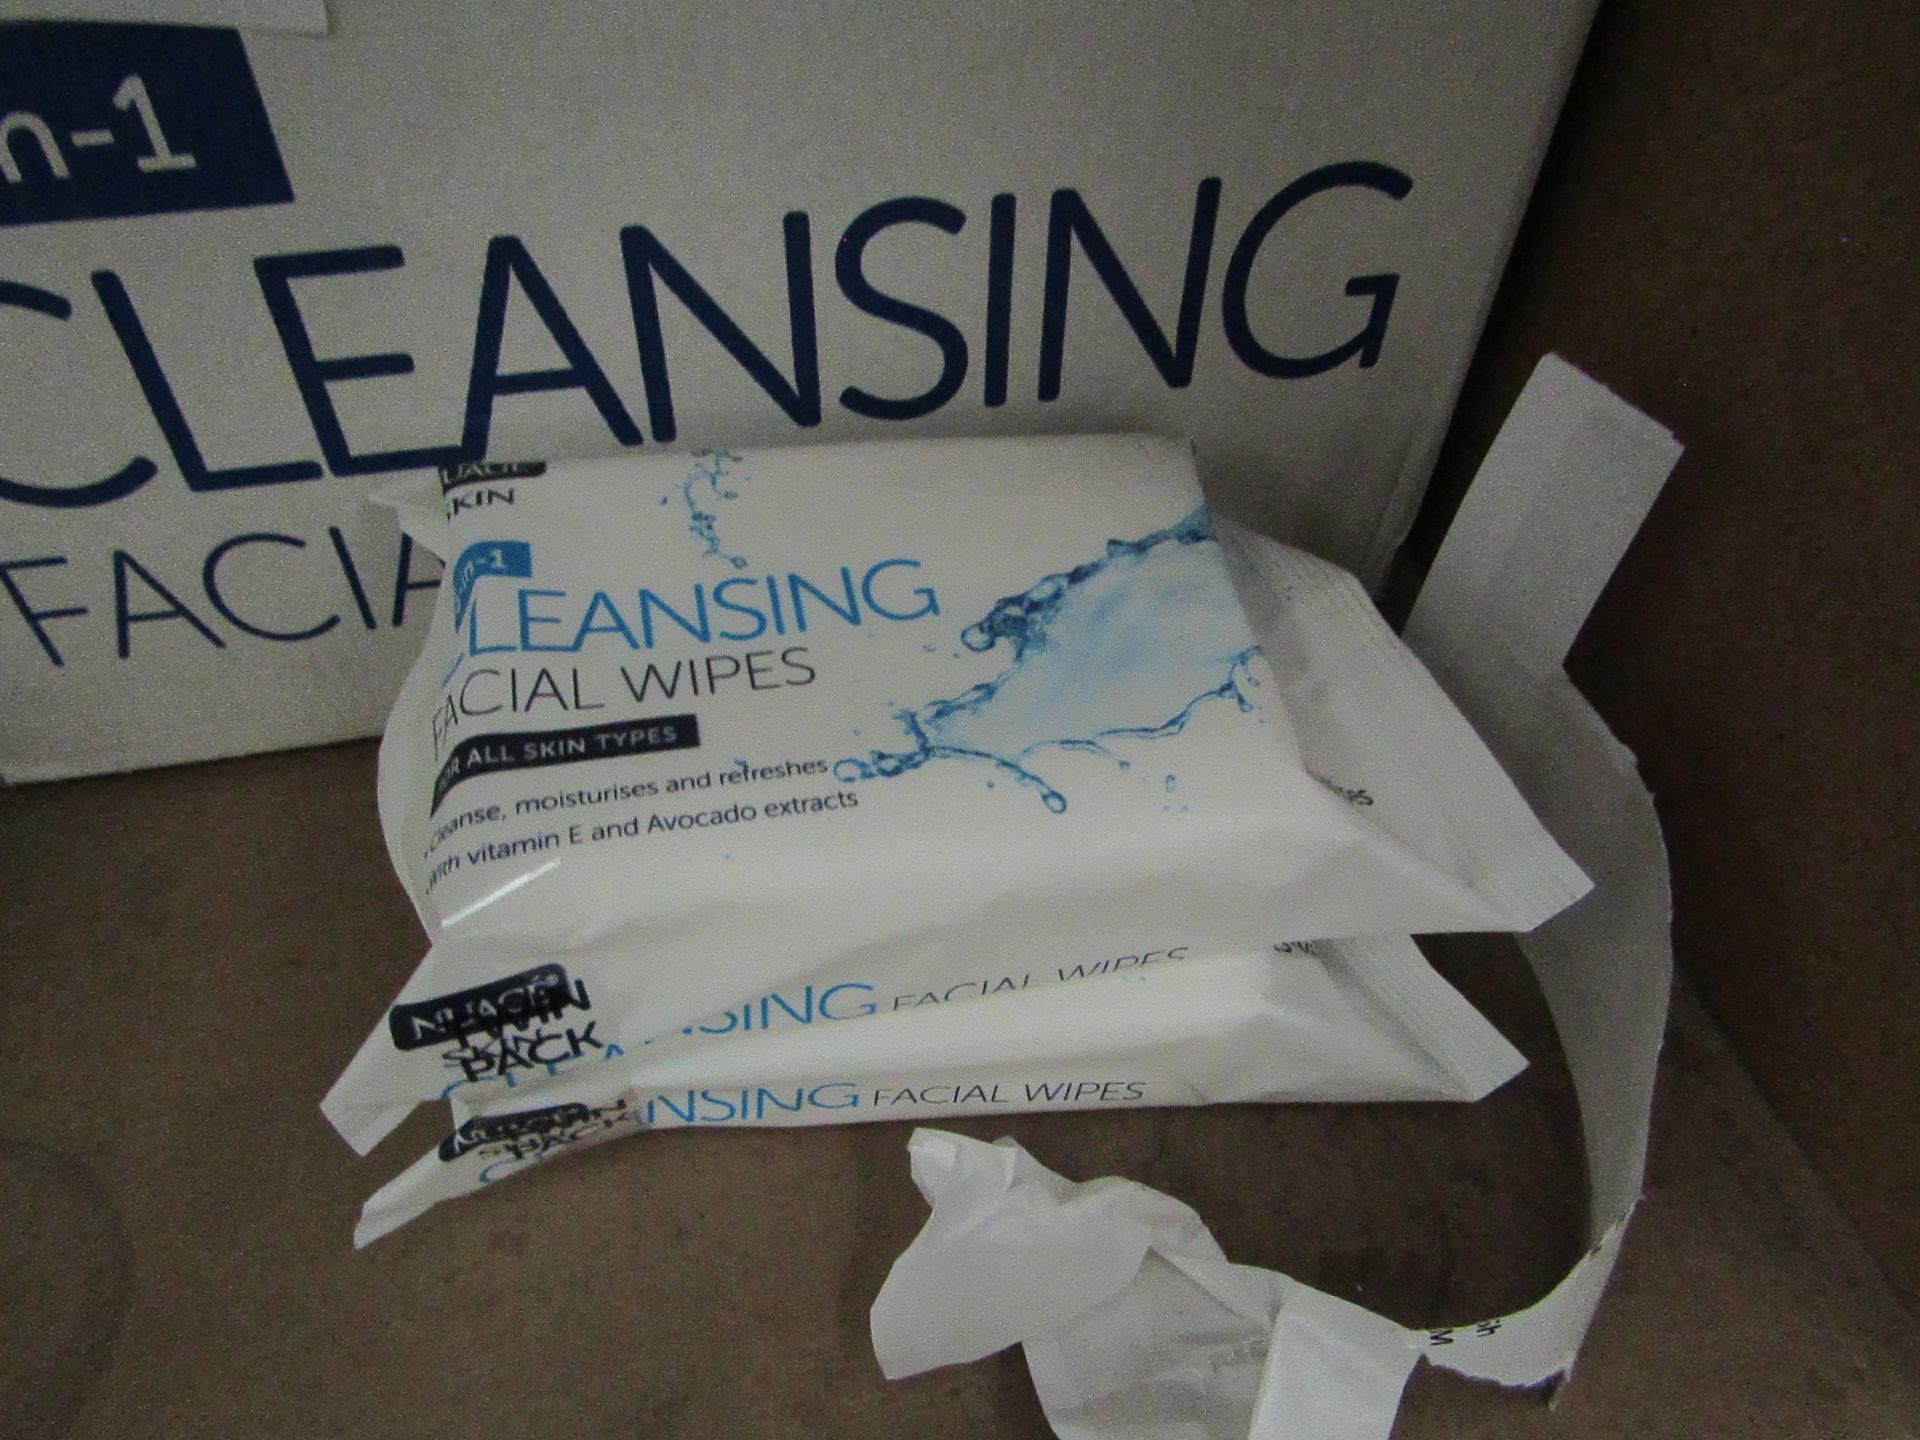 4x Nuage - 3in1 facial Cleansing Wipes - Unused & Packaged.